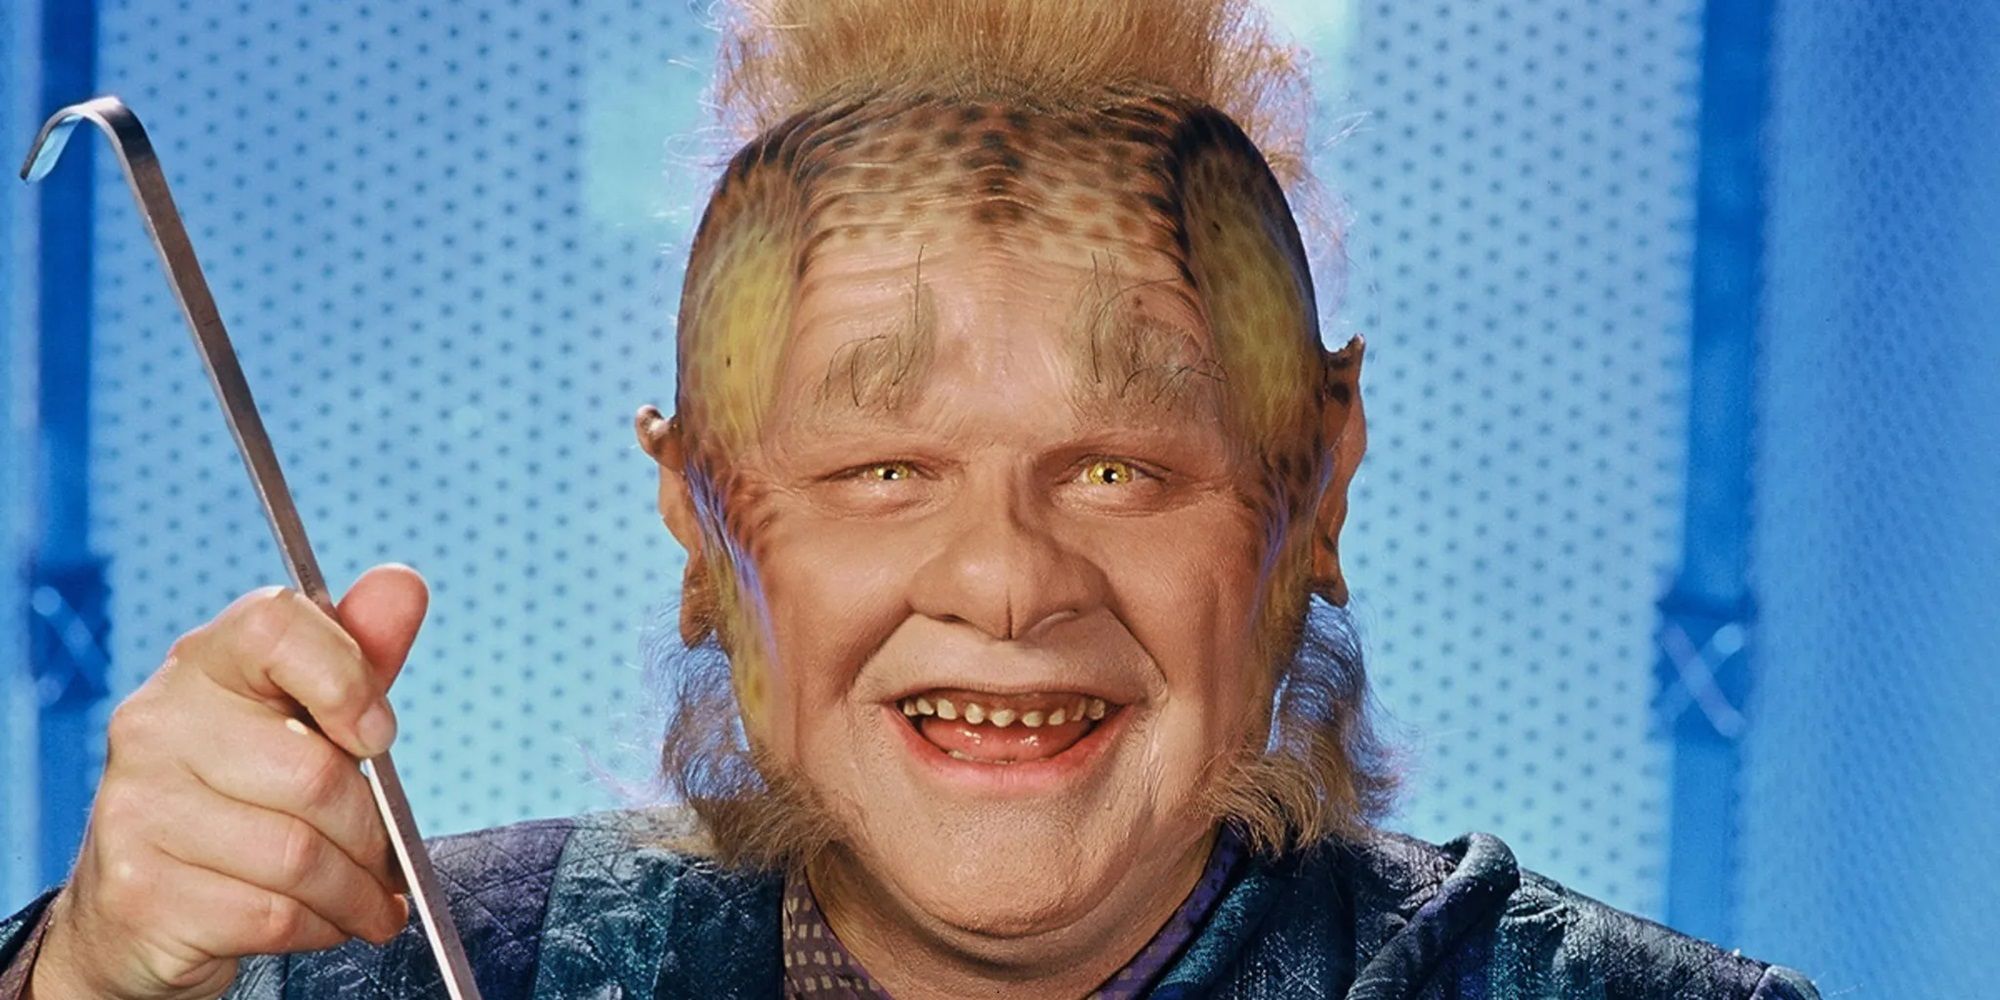 Neelix holding up a ladle wearing a blue outfit against a blue background in key art for Star Trek Voyager